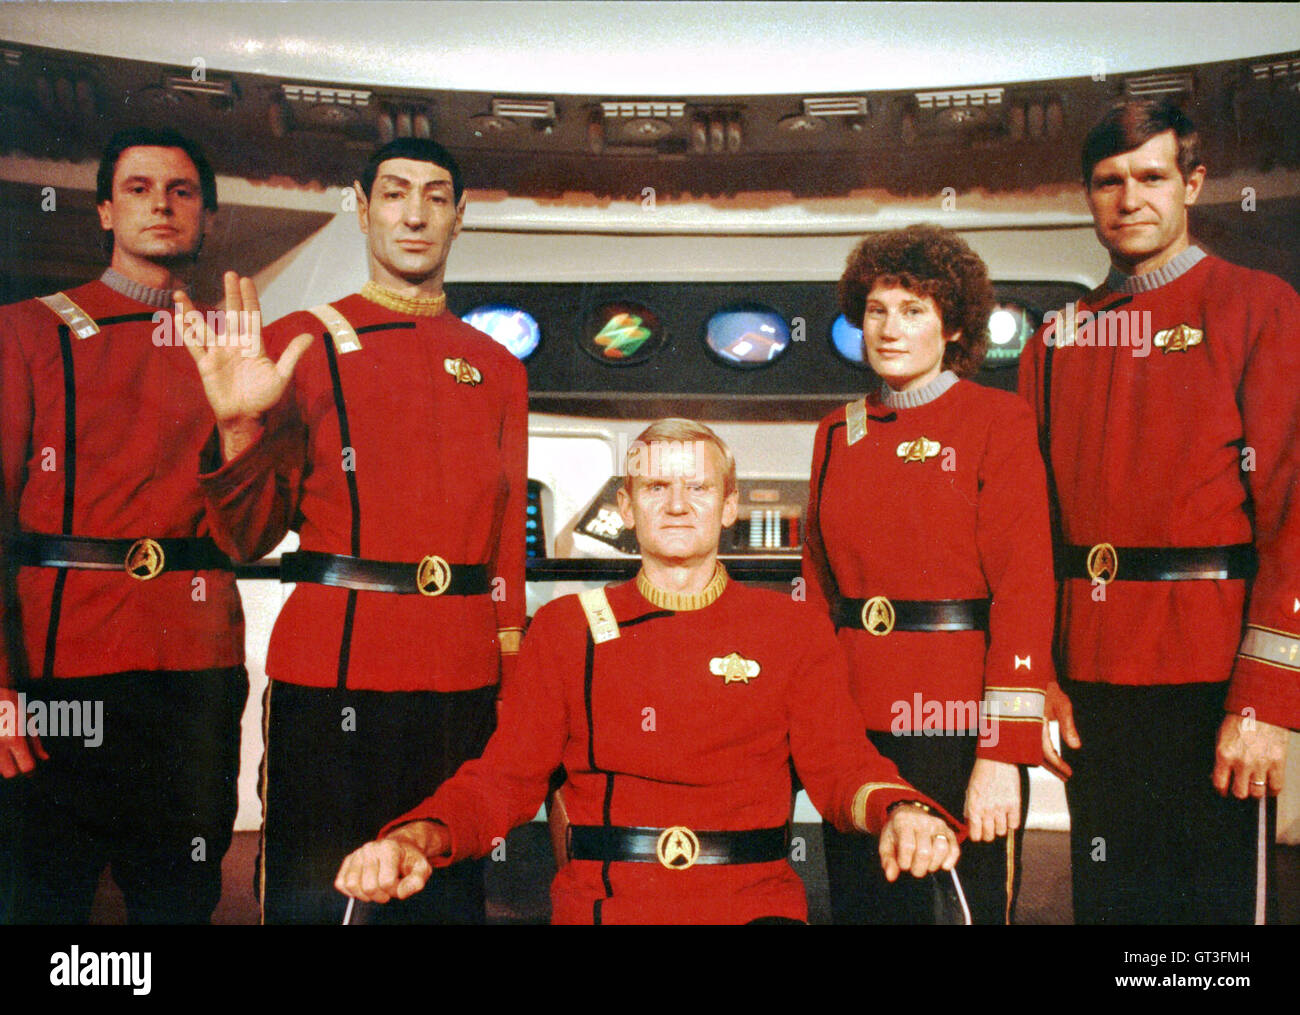 American astronauts from the STS-54 crew of the Space Shuttle Endeavour pose wearing costumes from the movie Star Trek II on the bridge crew of Planets Star Ship USS Enterprise at the Universal Studios California theme park June 24, 1992 in Los Angeles, California.  (L-R):  Greg Harbaugh, Mario 'Spock' Runco Jr., John Casper, Susan Helms and Don McMonagle. Stock Photo